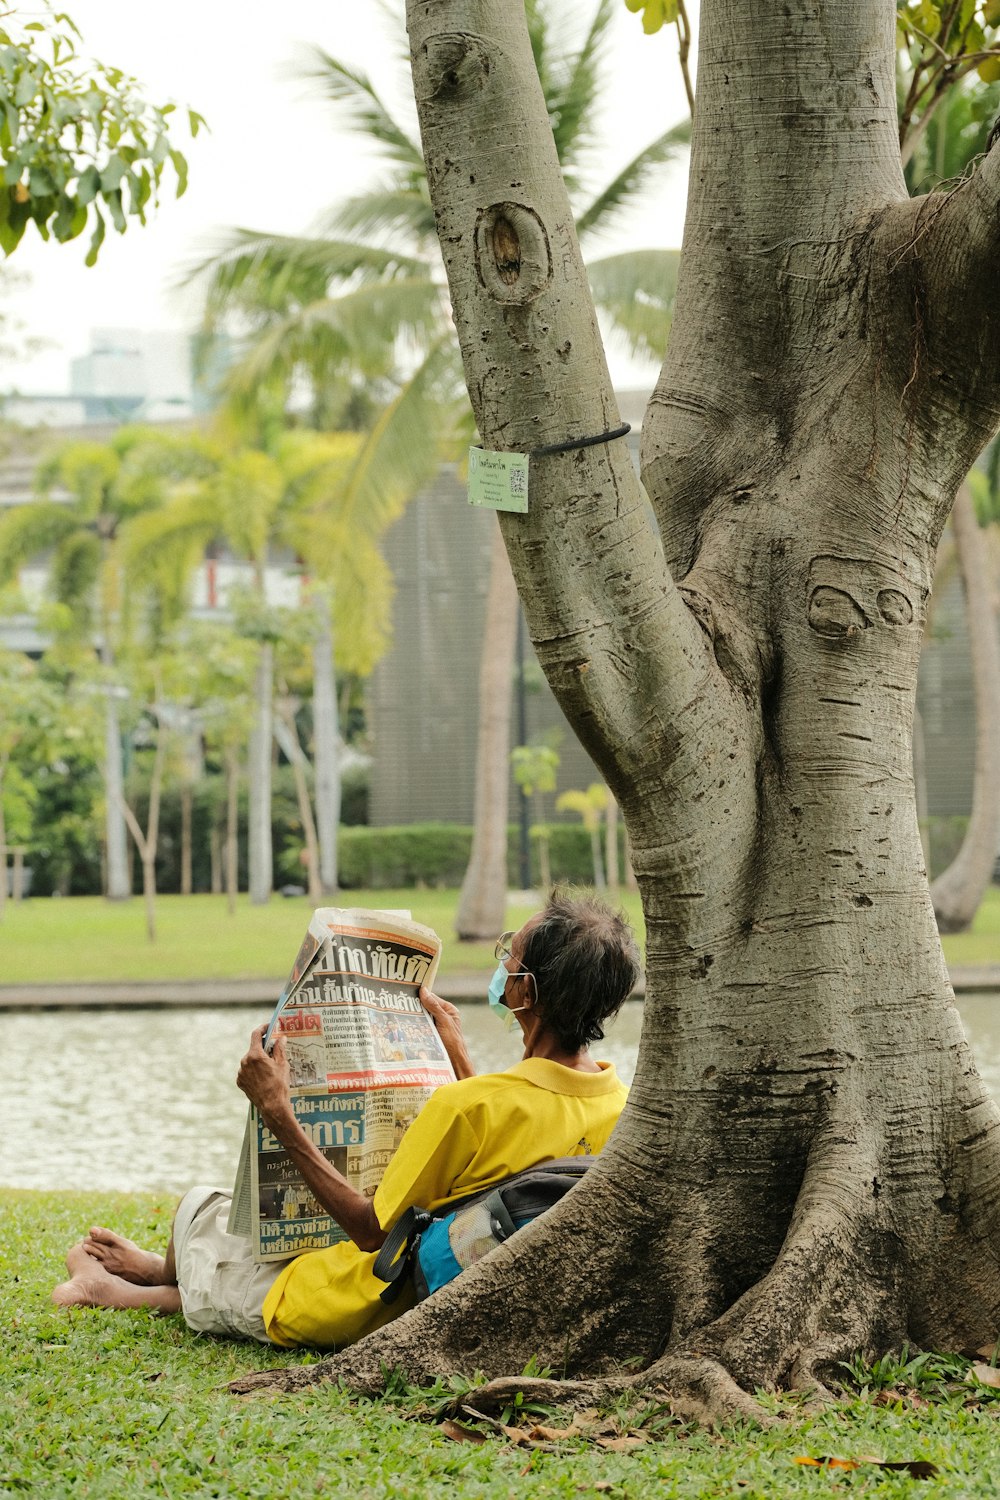 a person sitting under a tree reading a newspaper